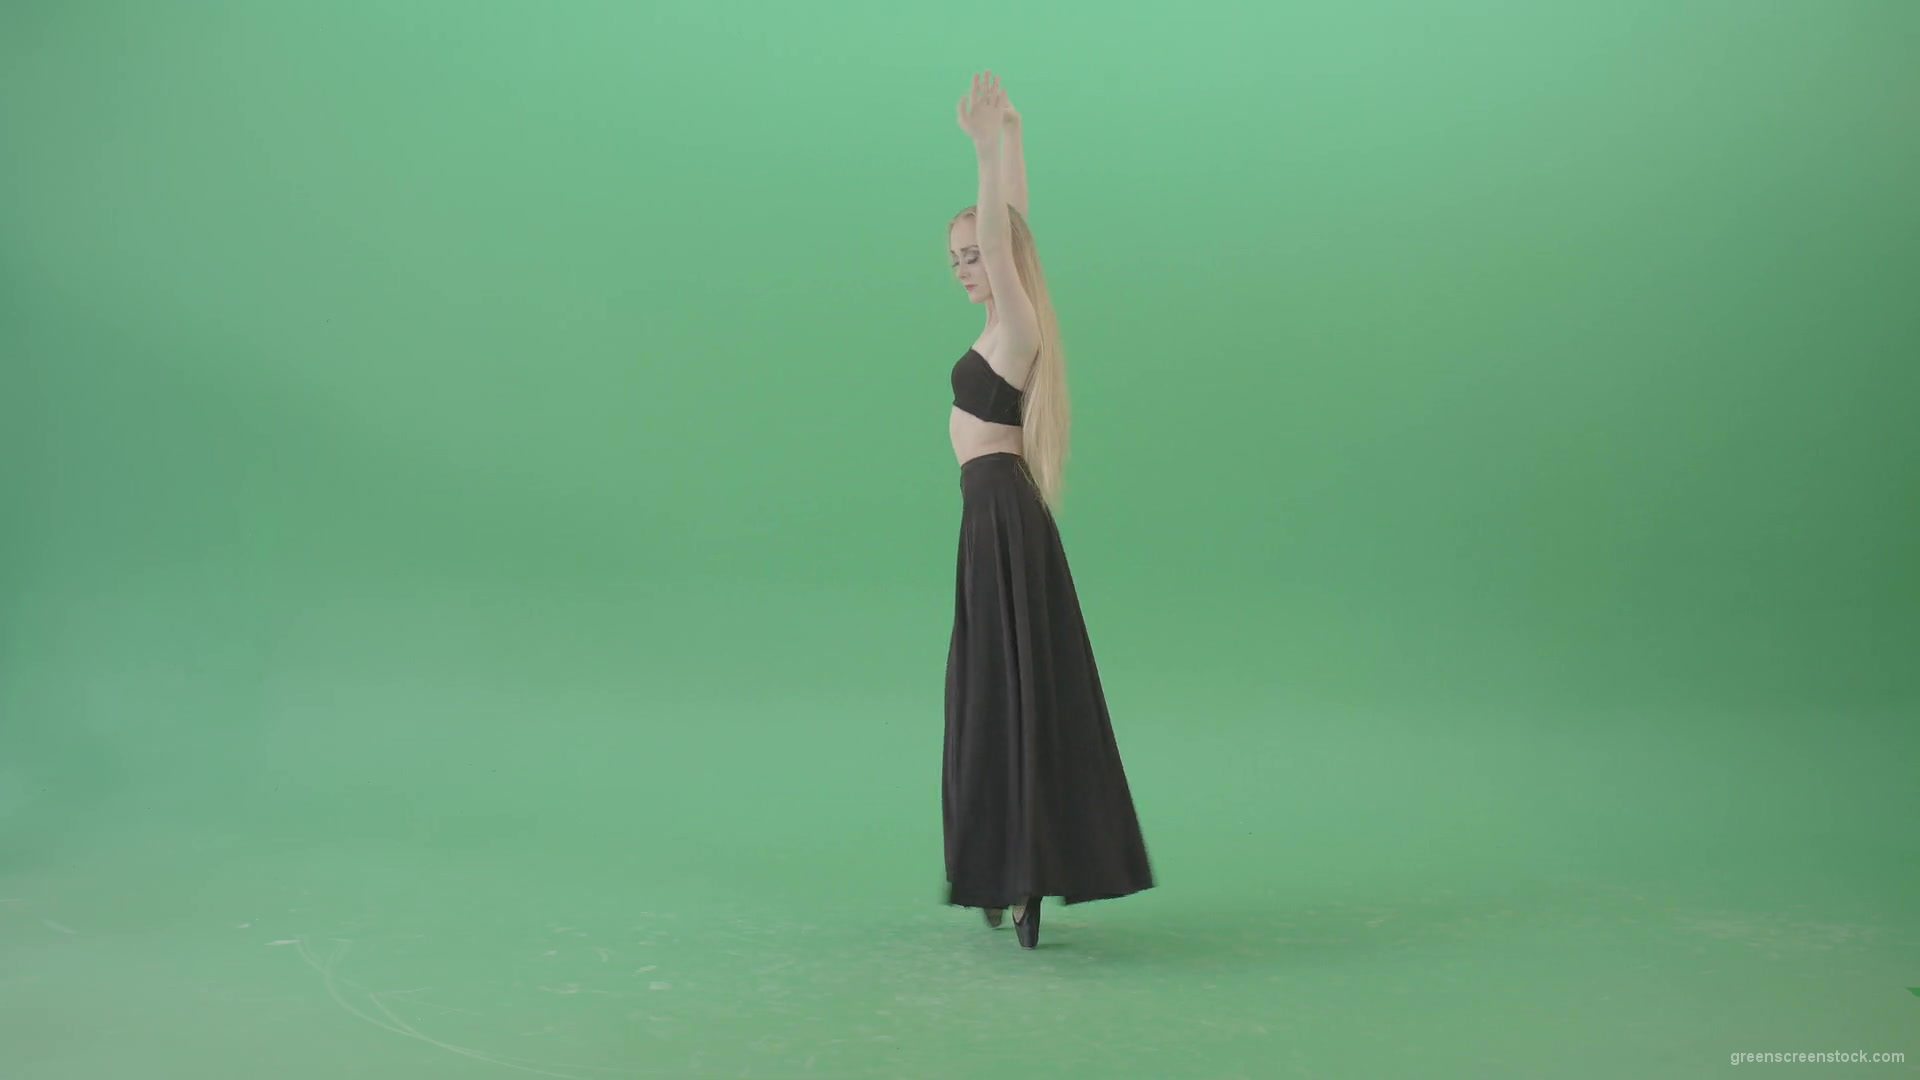 Spain-Ballet-dance-by-blonde-passion-ballerina-girl-on-green-screen-4K-Video-Footage-1920_008 Green Screen Stock